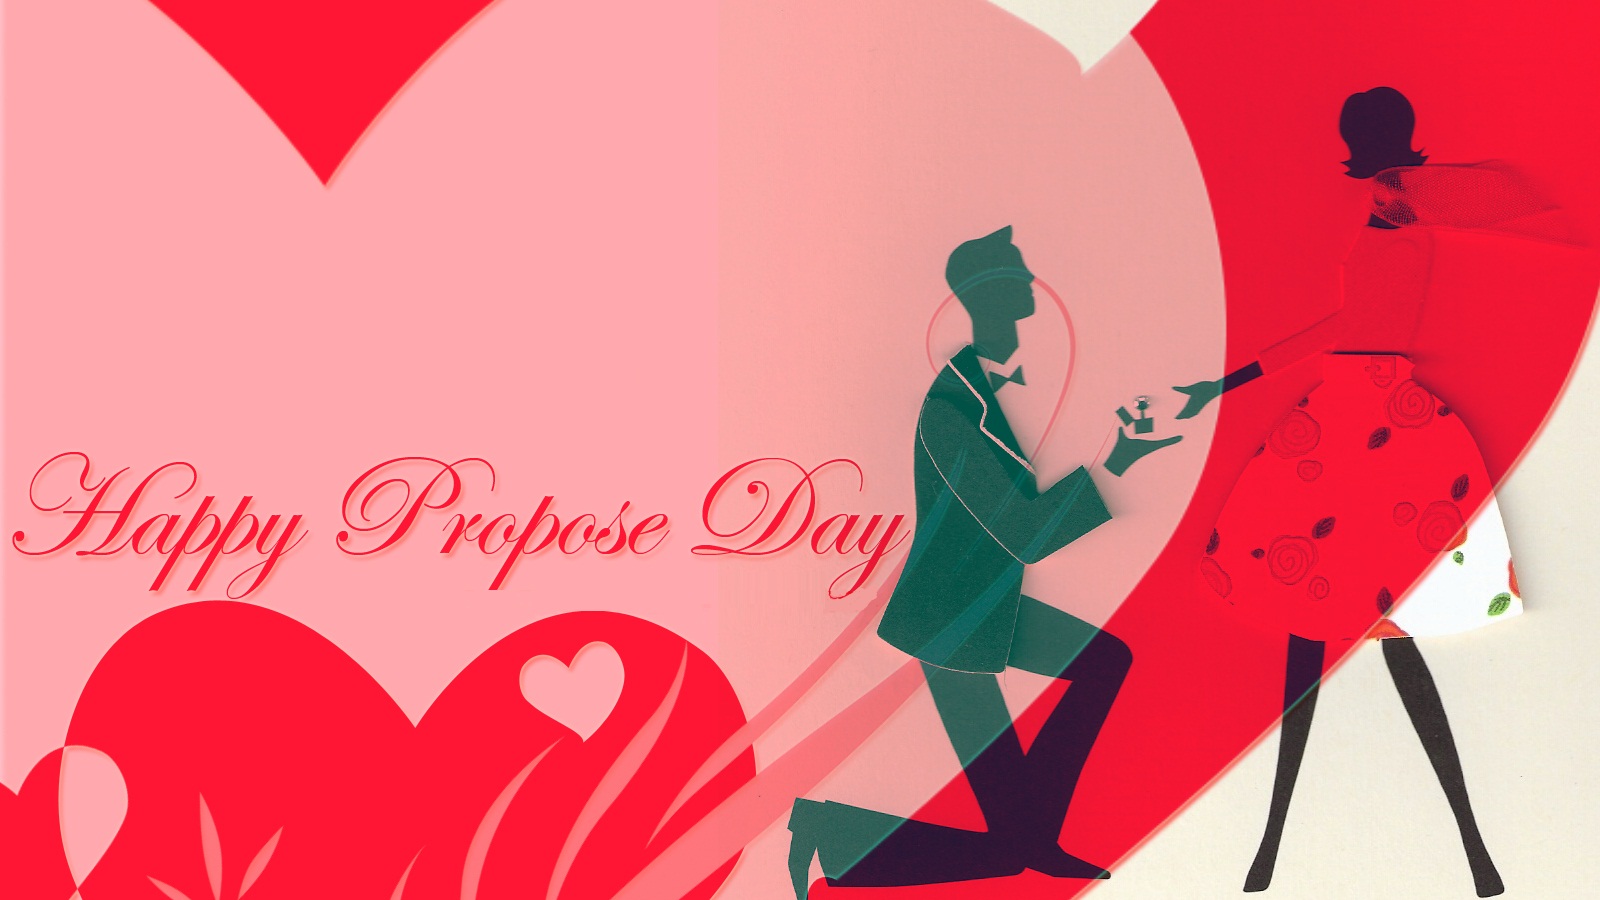 Propose Day Greeting Cards - HD Wallpaper 